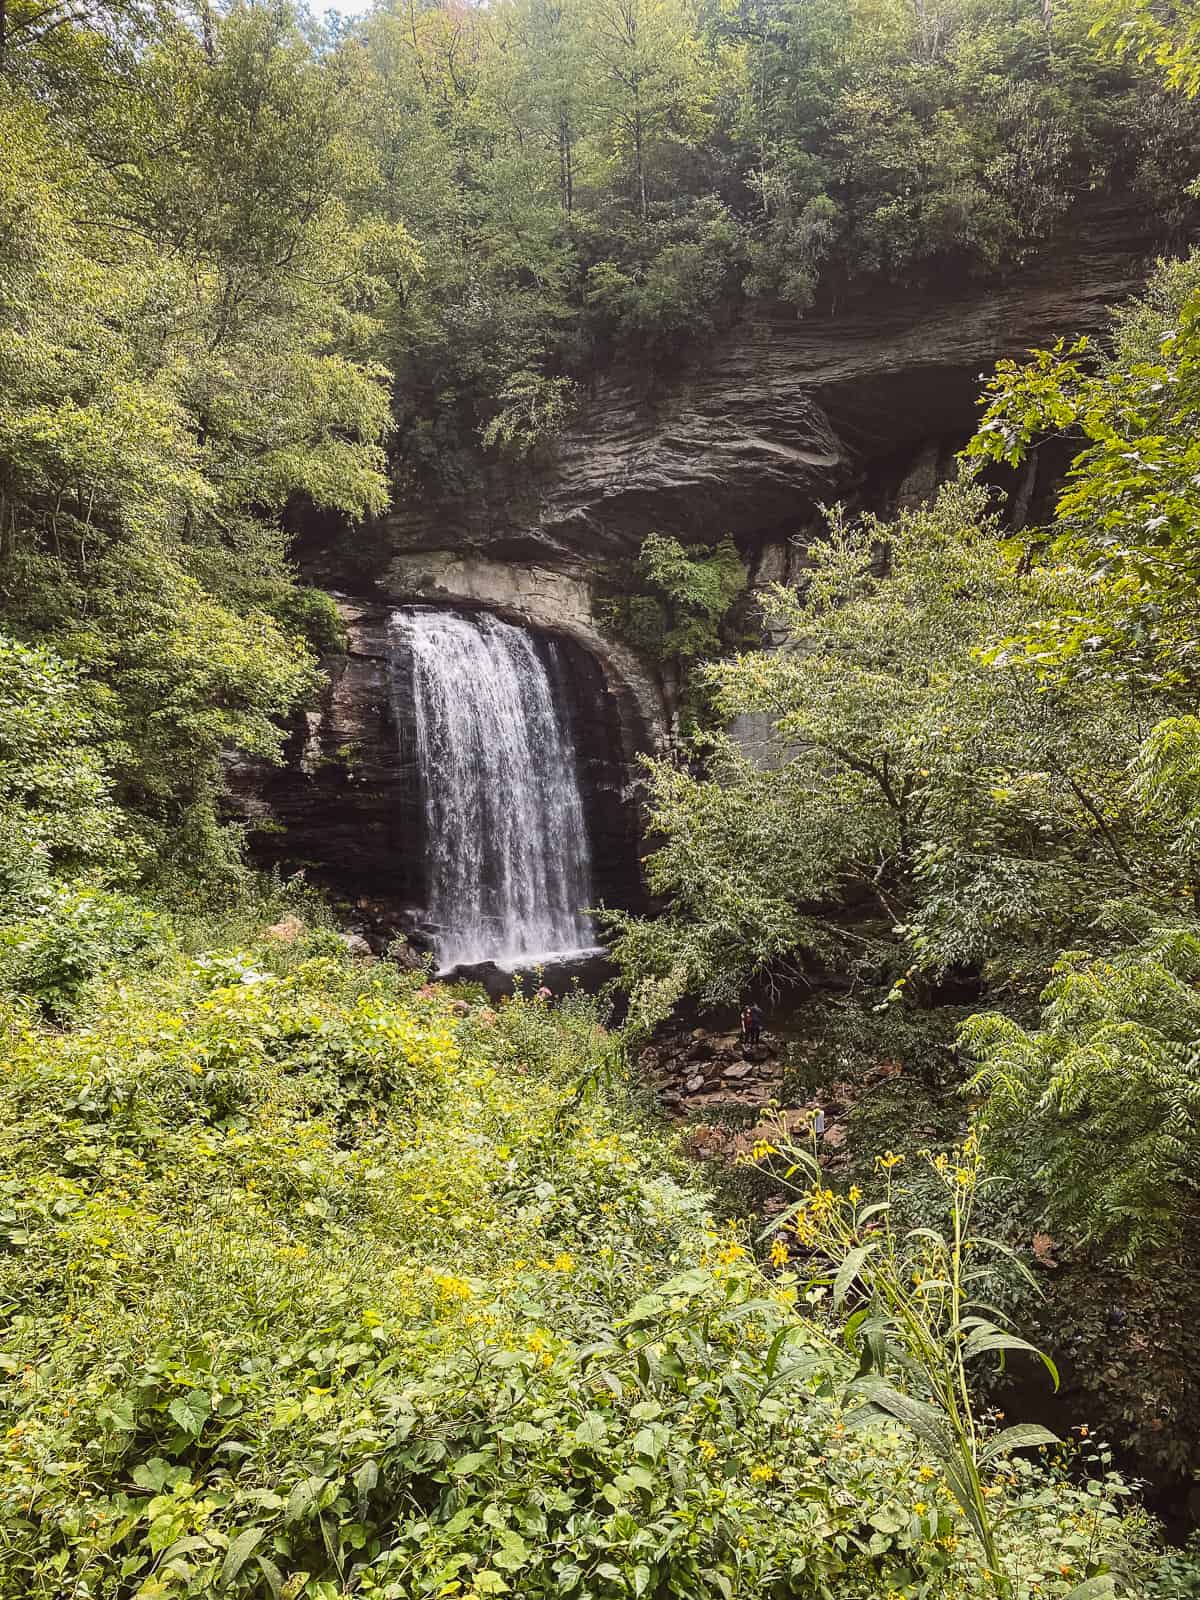 Looking Glass falls in Pisgah National Forest. A beautiful plunging waterfall surrounded by greenery.